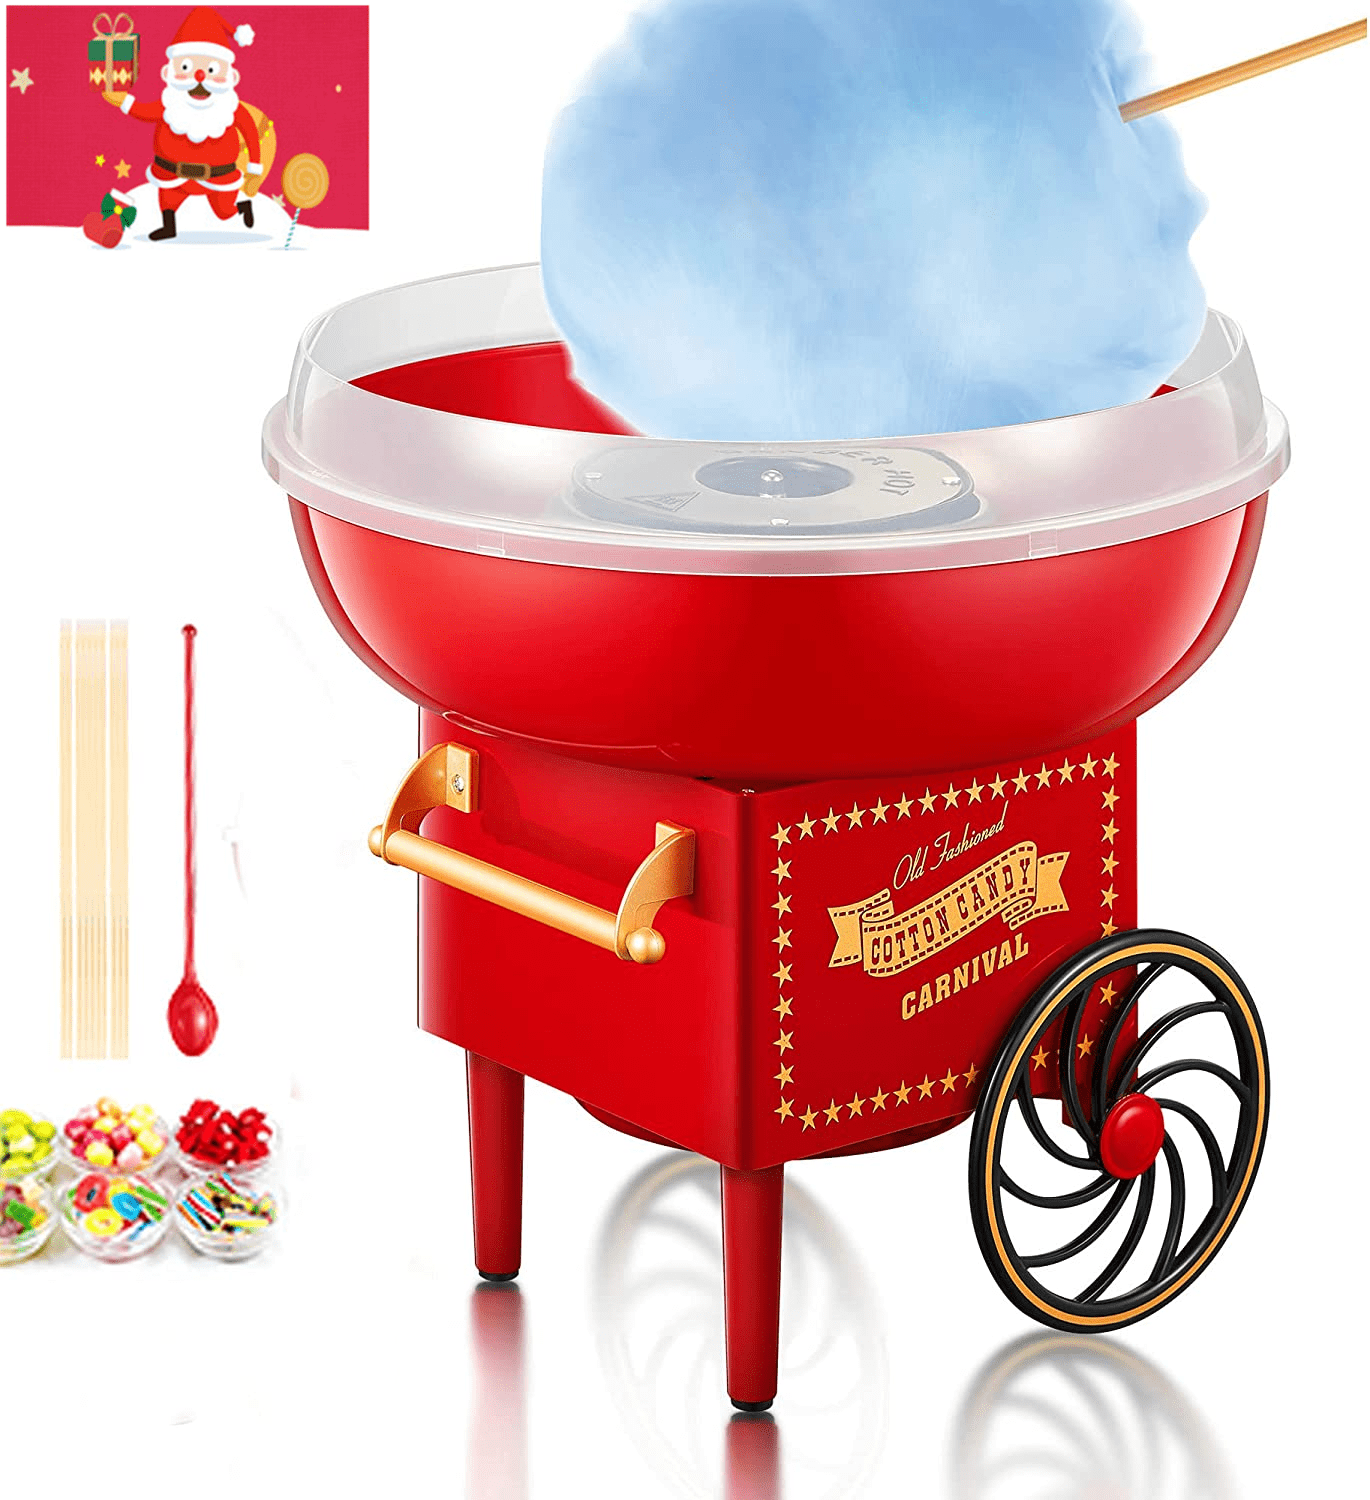 10 Sticks Party Gift for Children and Adult Fairground Style Cotton Candy Electric Cotton Candy Maker 500W Candyfloss Machine Maker with Non-Stick Plates 